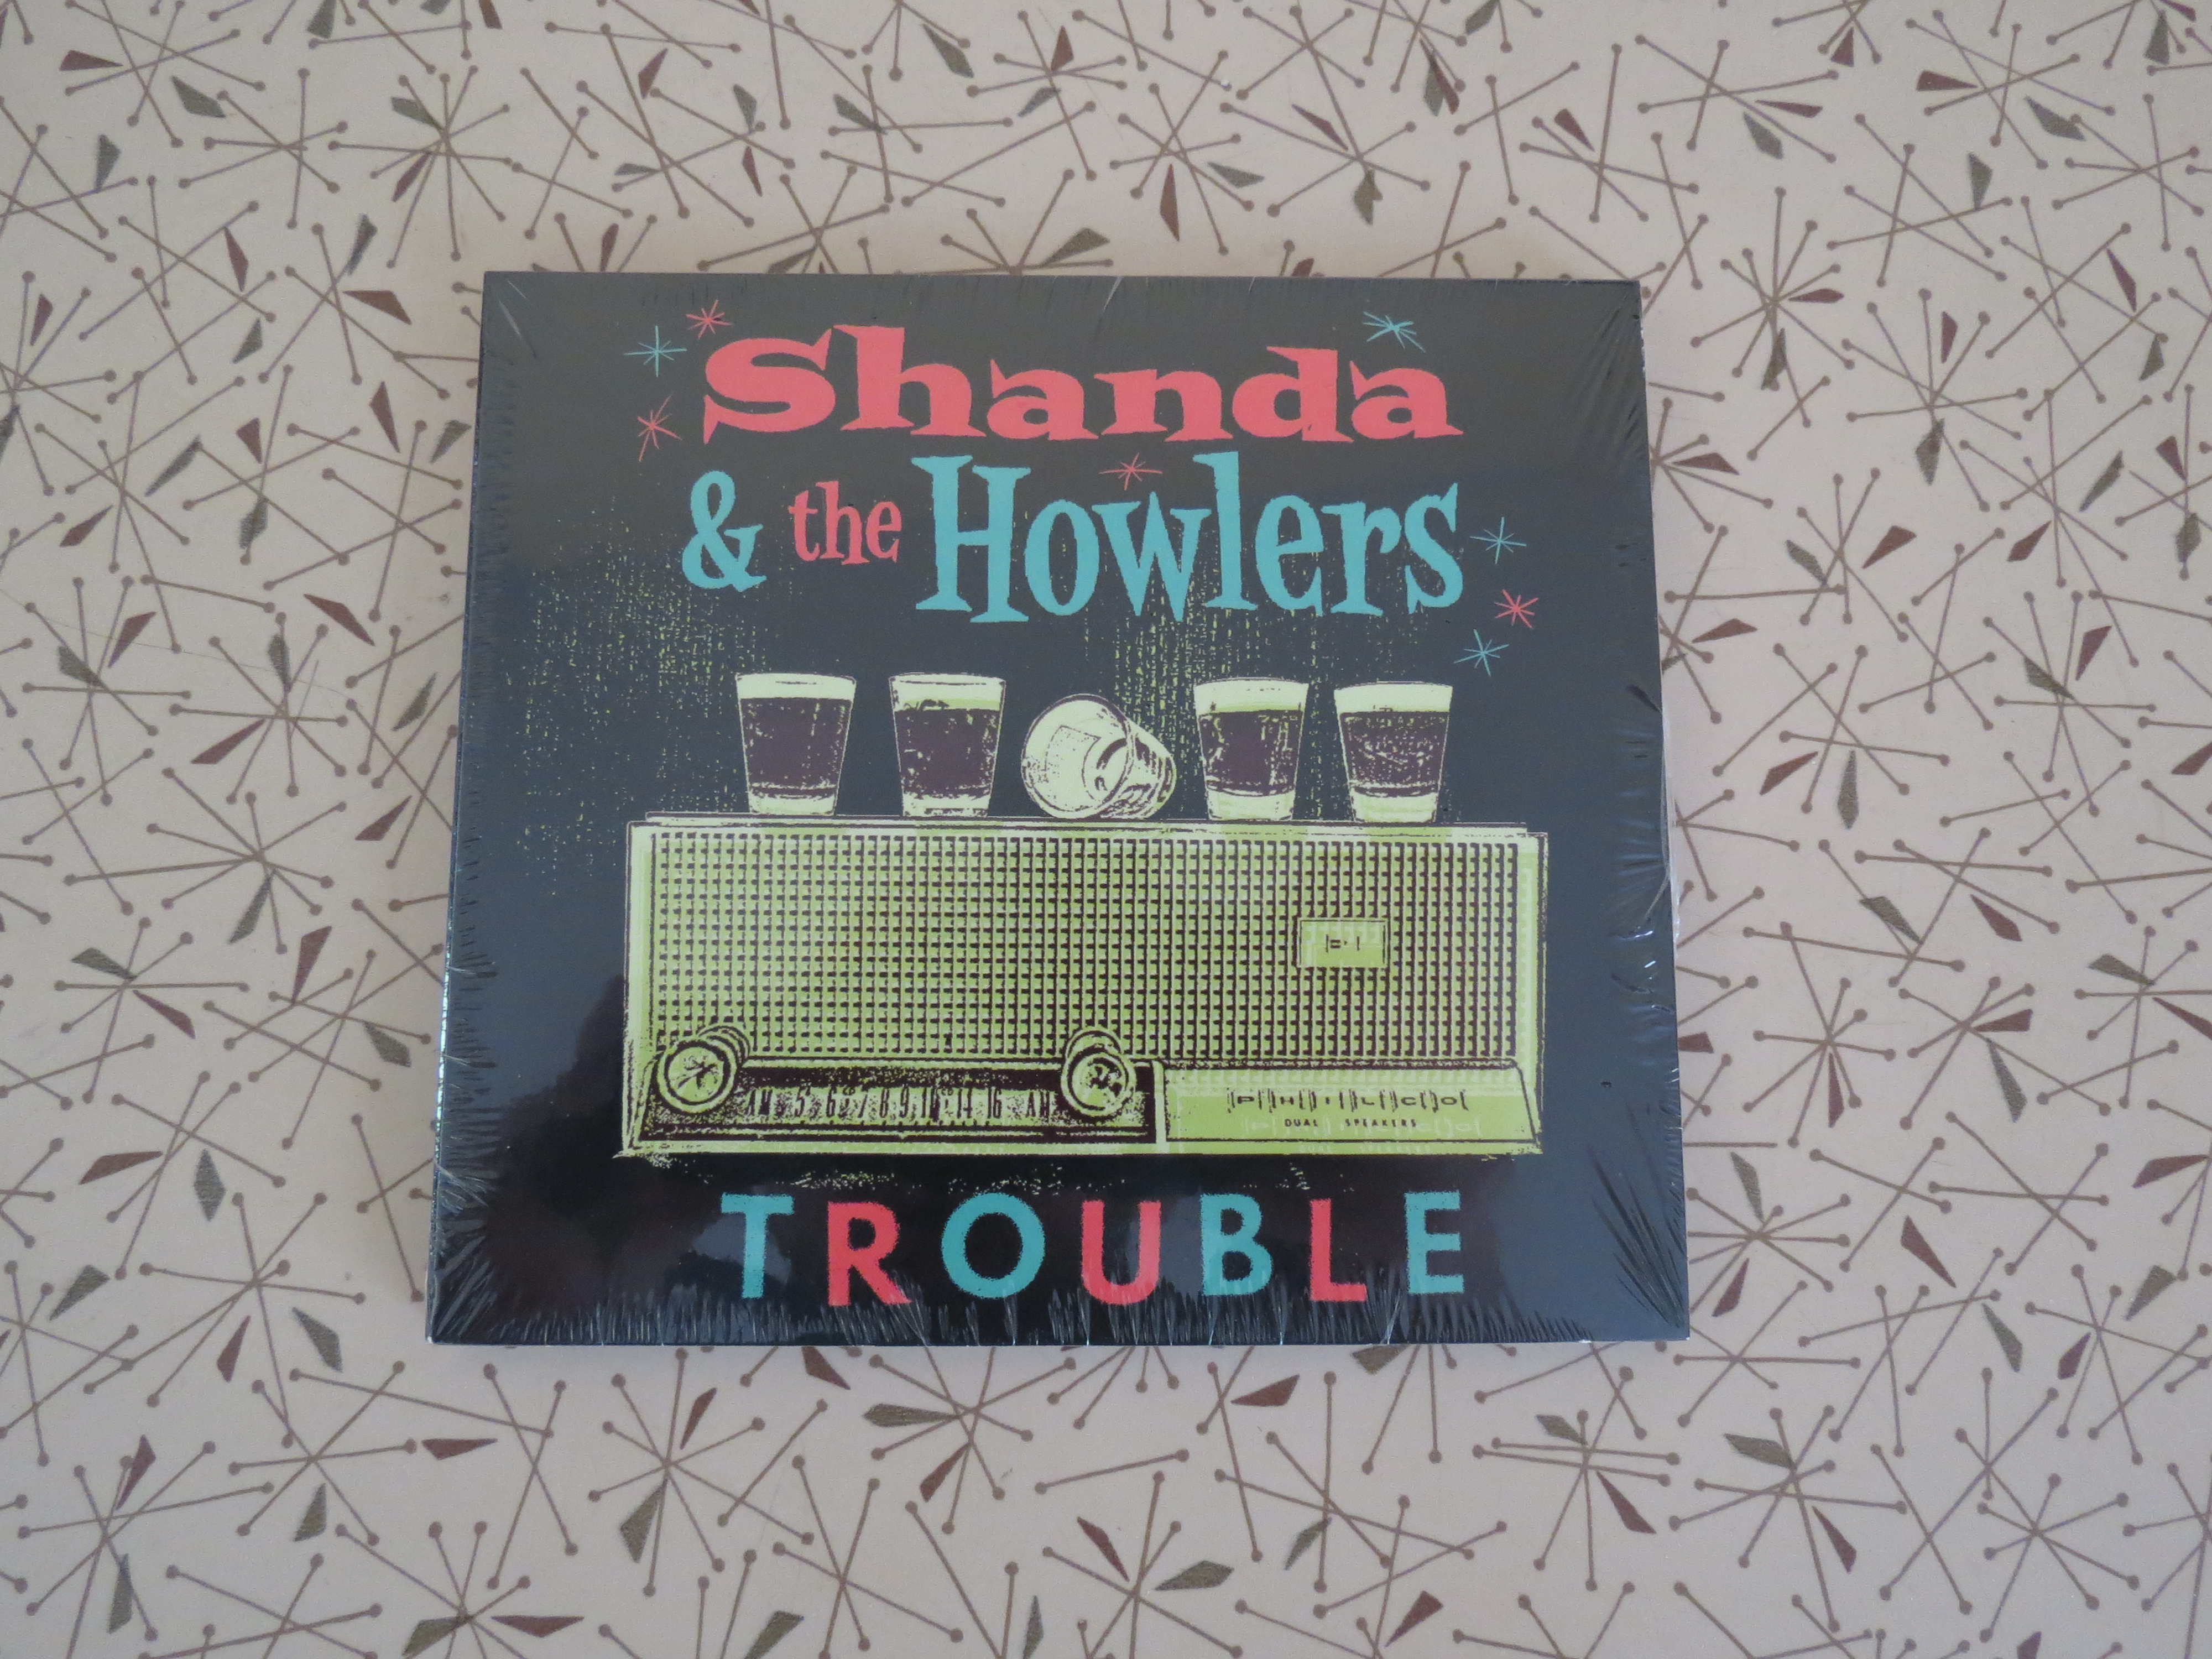 Trouble CD